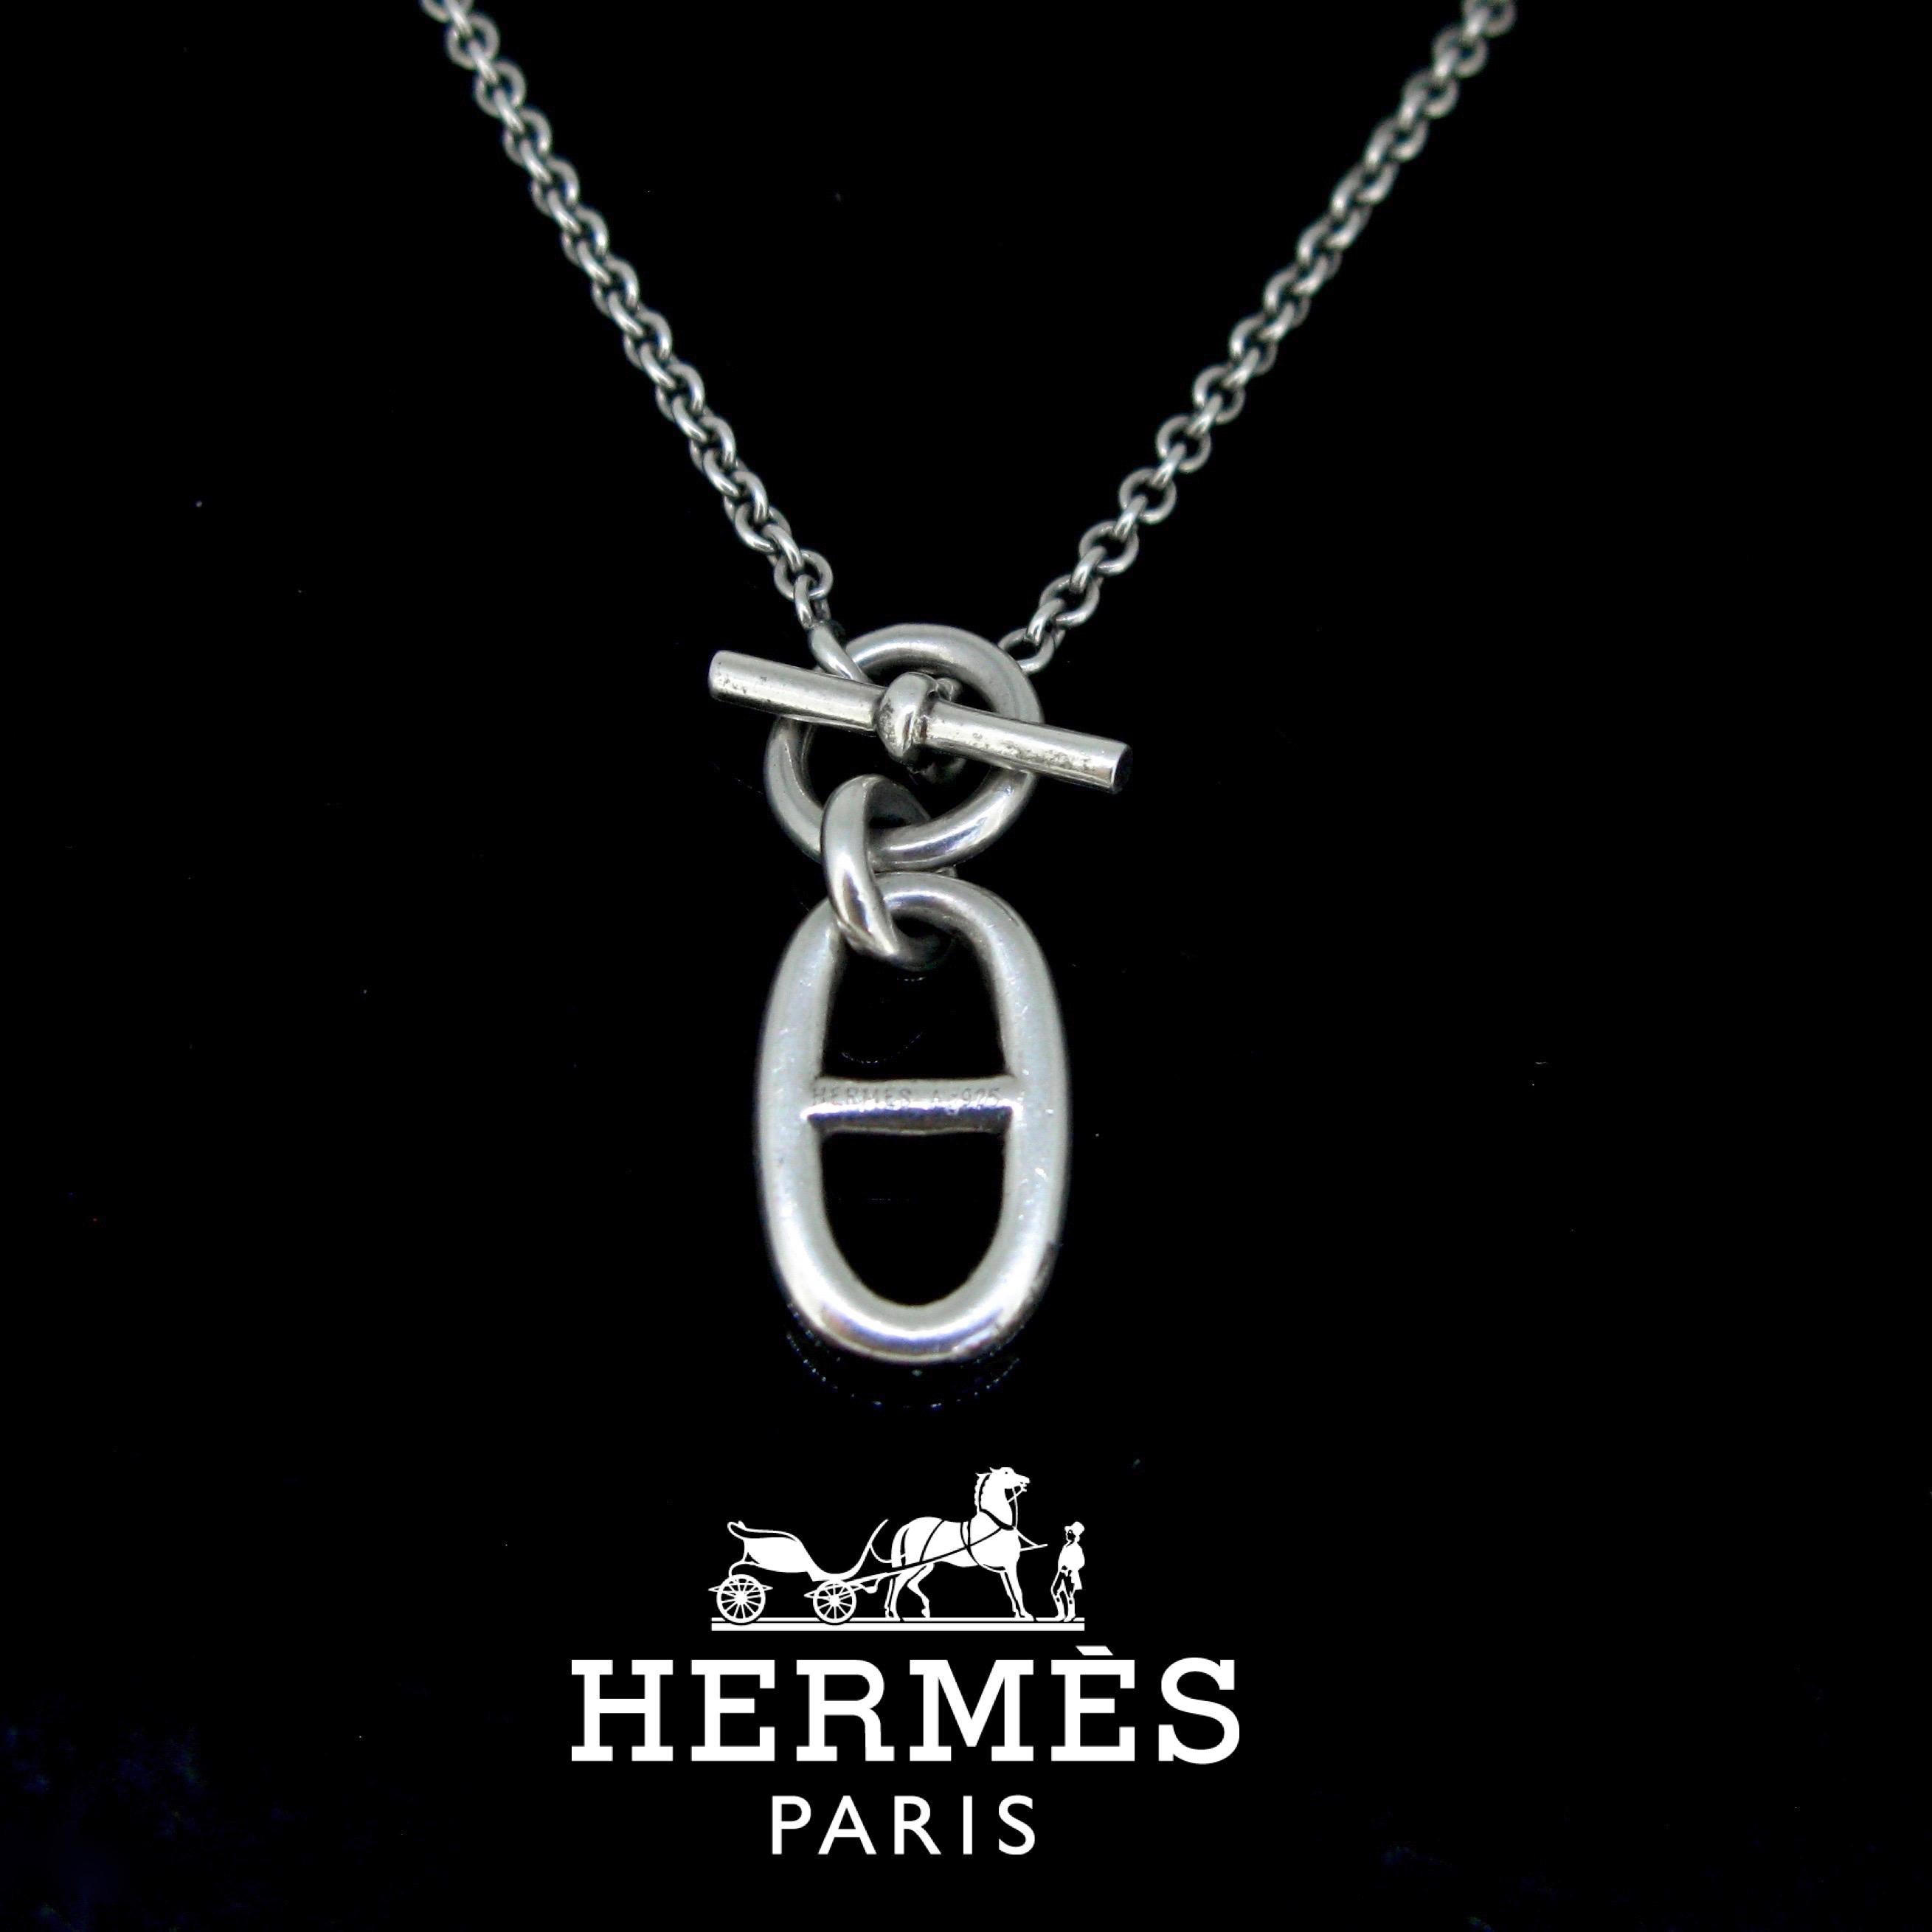 This necklace pendant comes from the Chaine d’Ancre collection. It is made in silver. The necklace comes with its Hermès box. It measures 16in / 40cm long.

Weight:	10,3gr

Metal:	Silver 925/1000

Condition:	Very